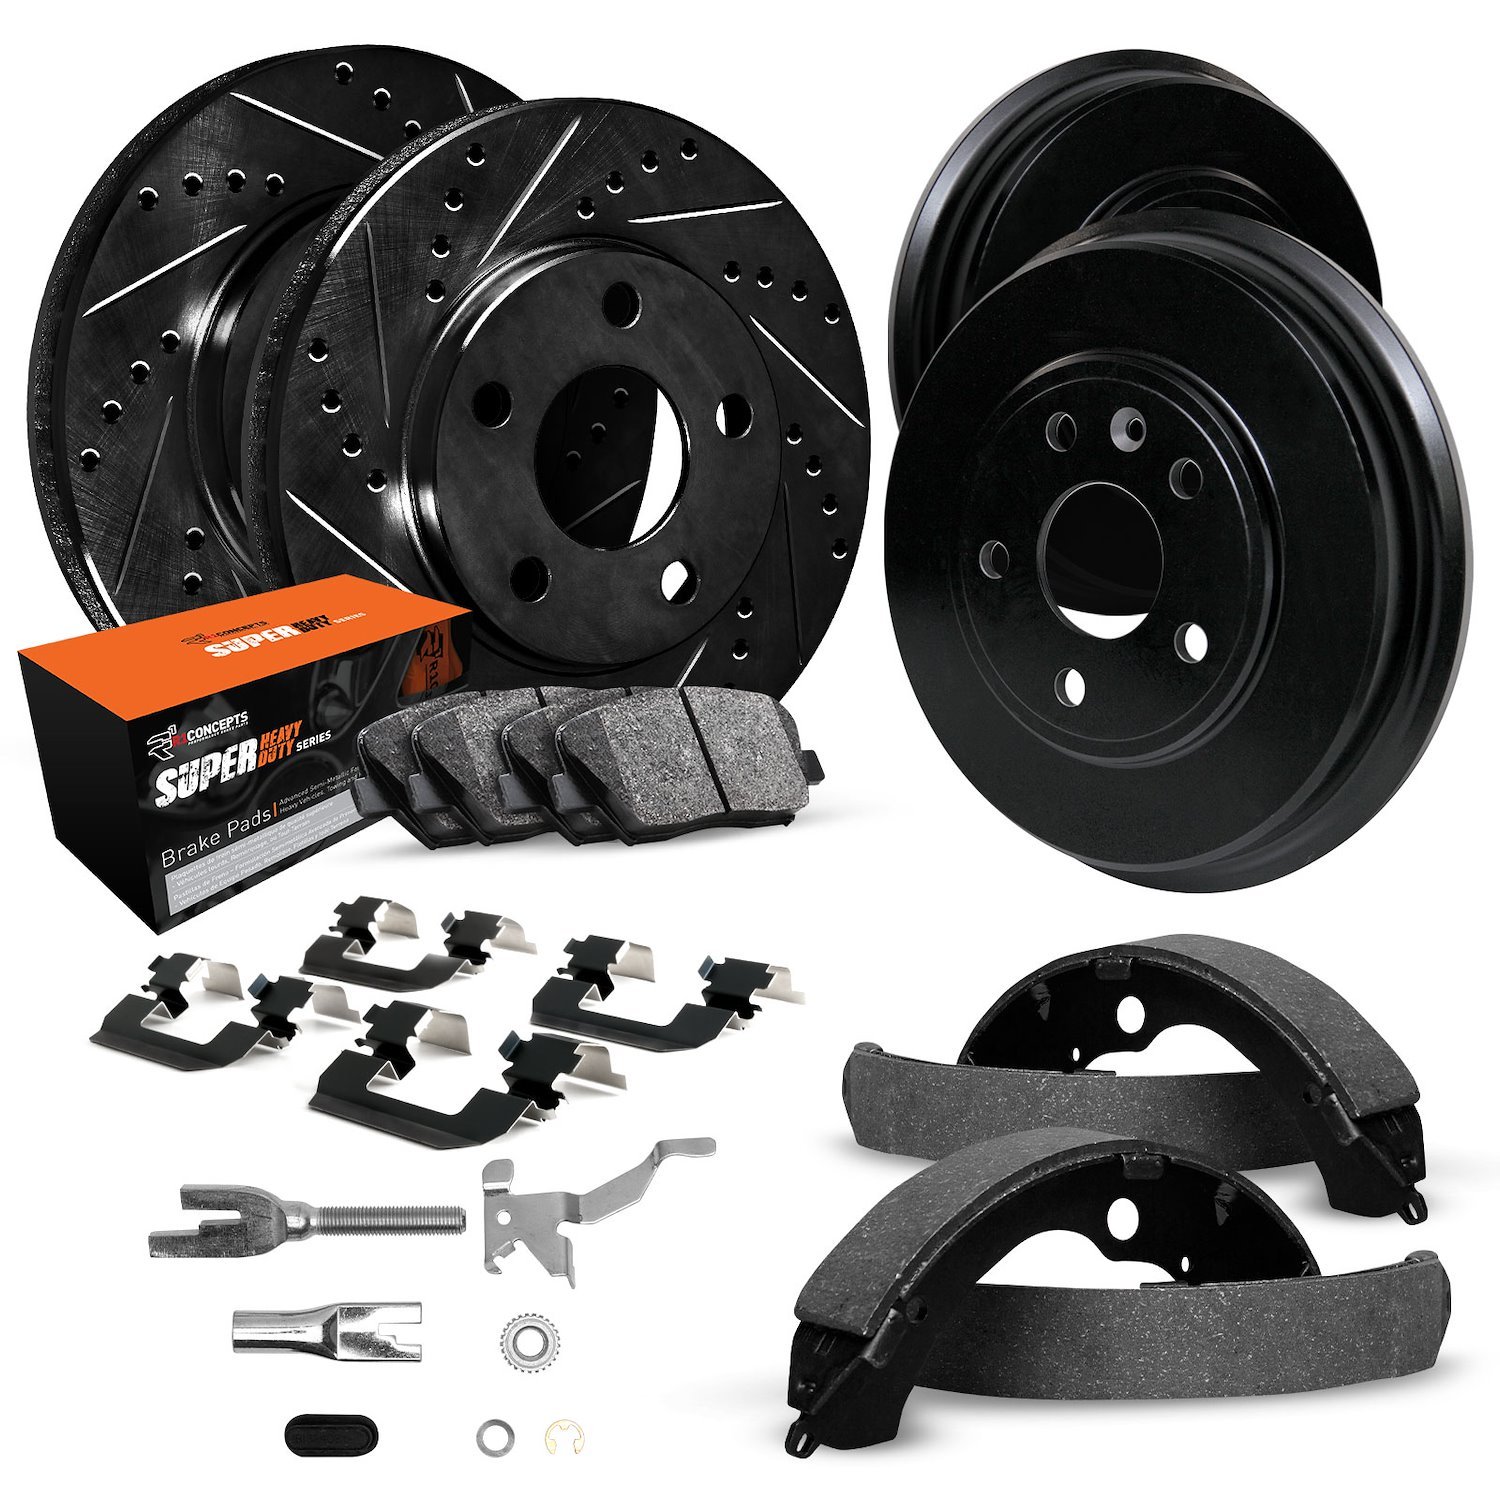 E-Line Drilled/Slotted Black Rotor & Drum Set w/Super-Duty Pads, Shoes, Hardware/Adjusters, 1980-1989 Ford/Lincoln/Mercury/Mazda